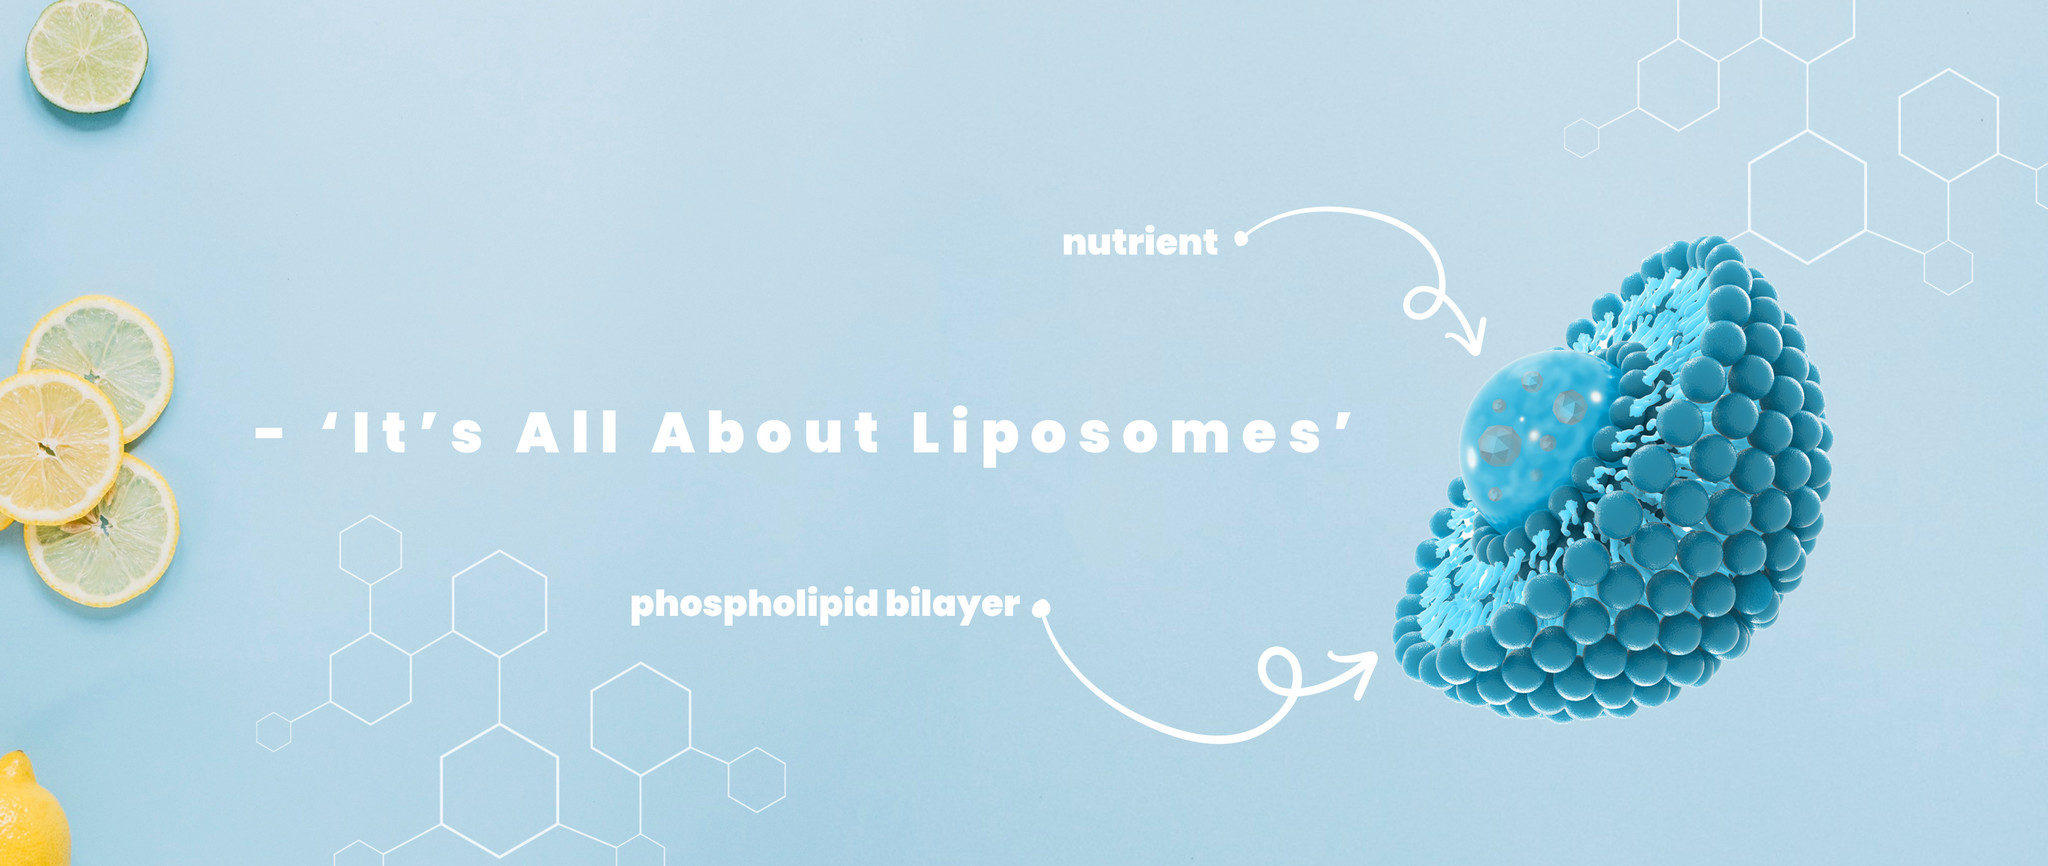 What are liposomes? 